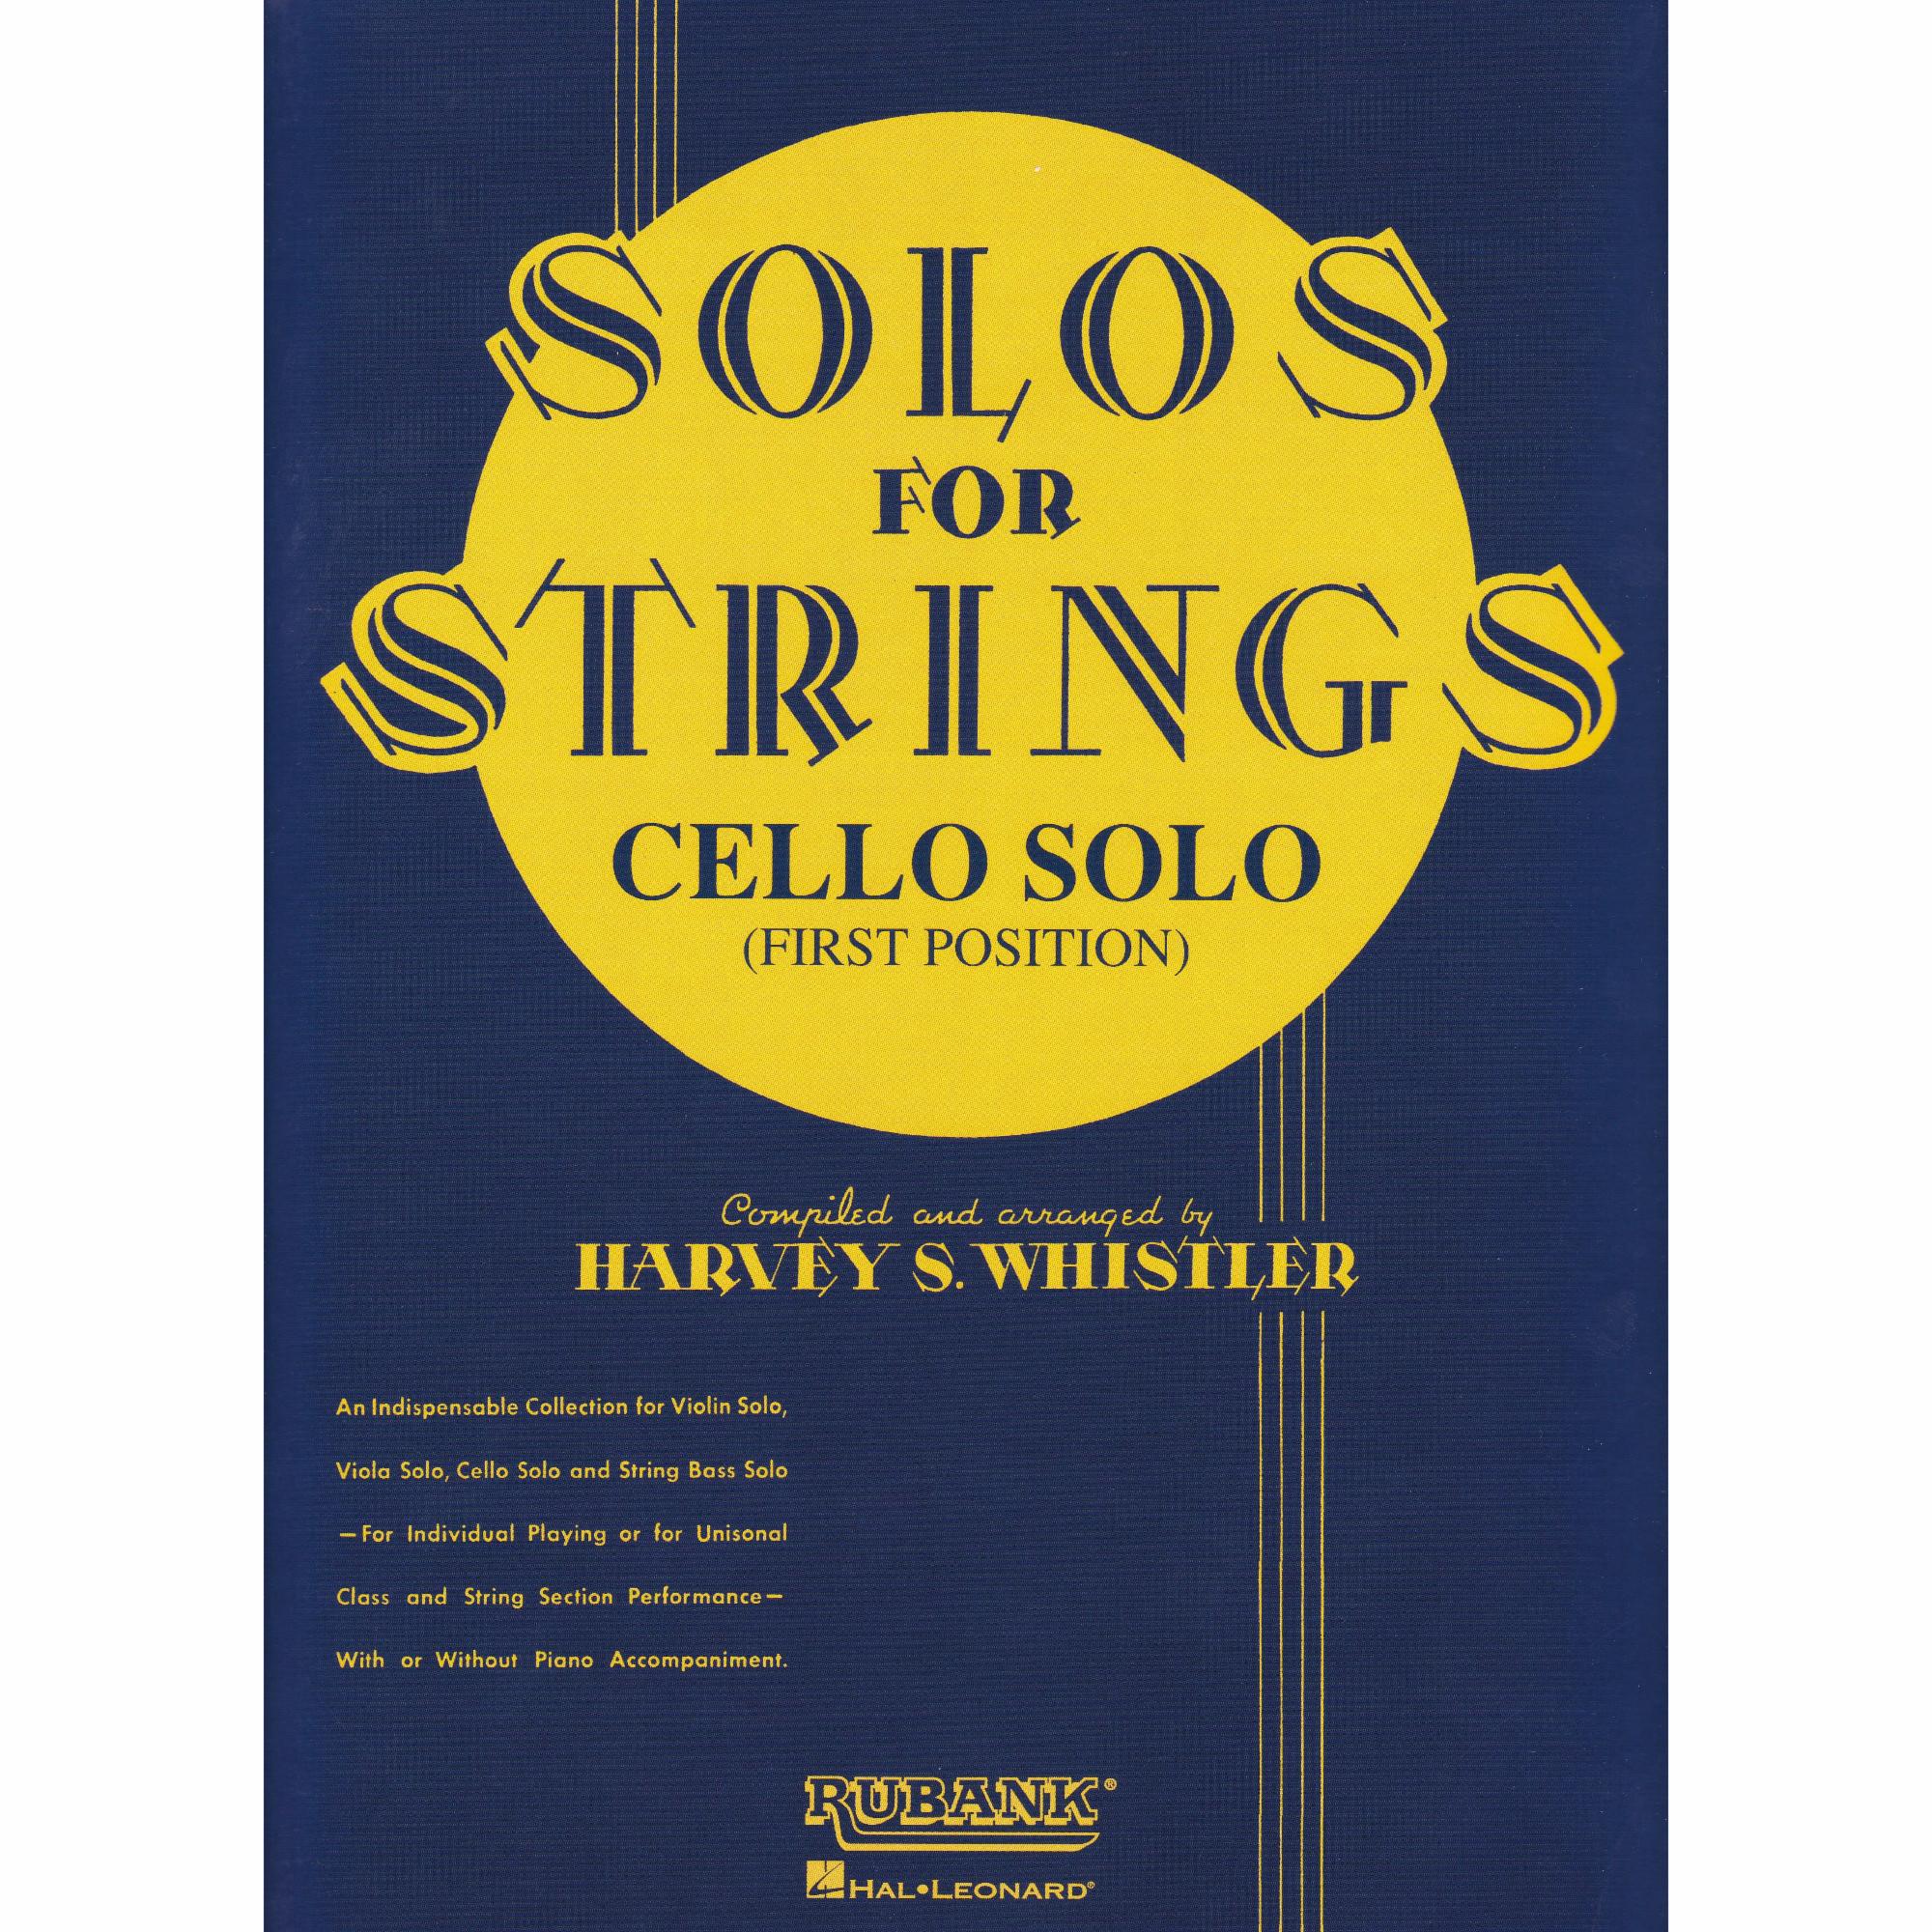 Solos for Strings for Cello